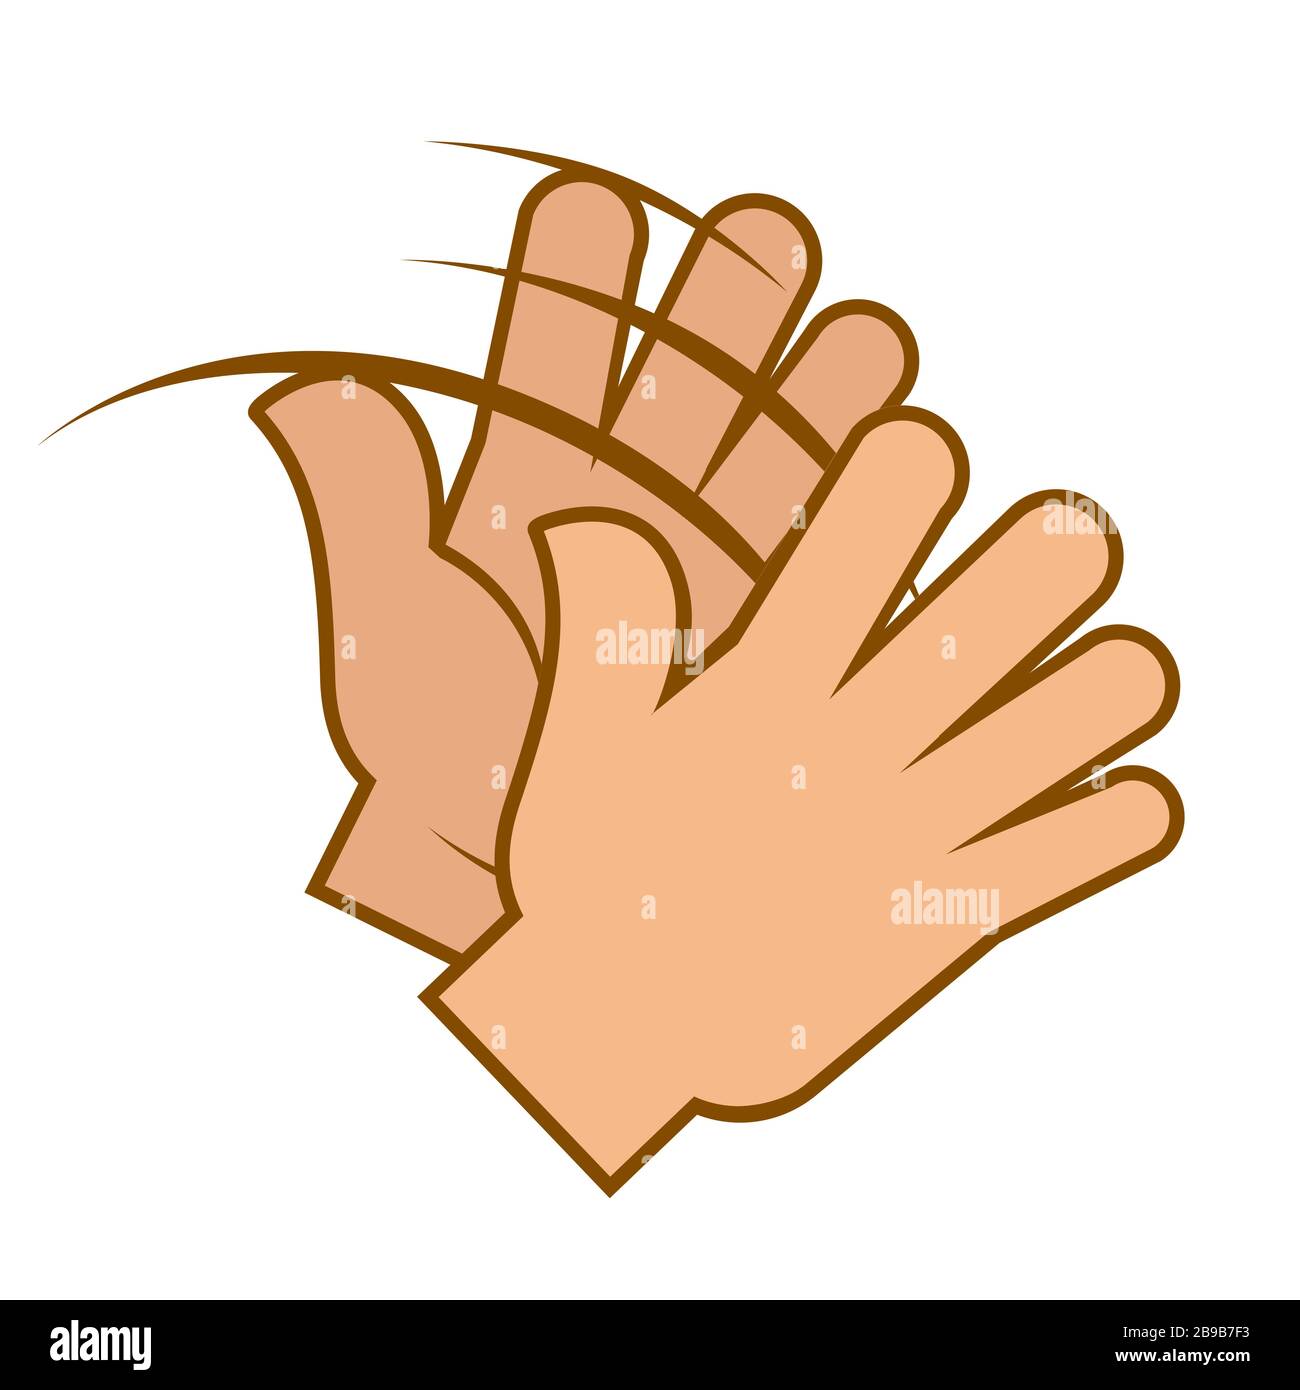 Applause Gesture Clapping Hands Emoji Isolated Icon Stock Vector Image Art Alamy